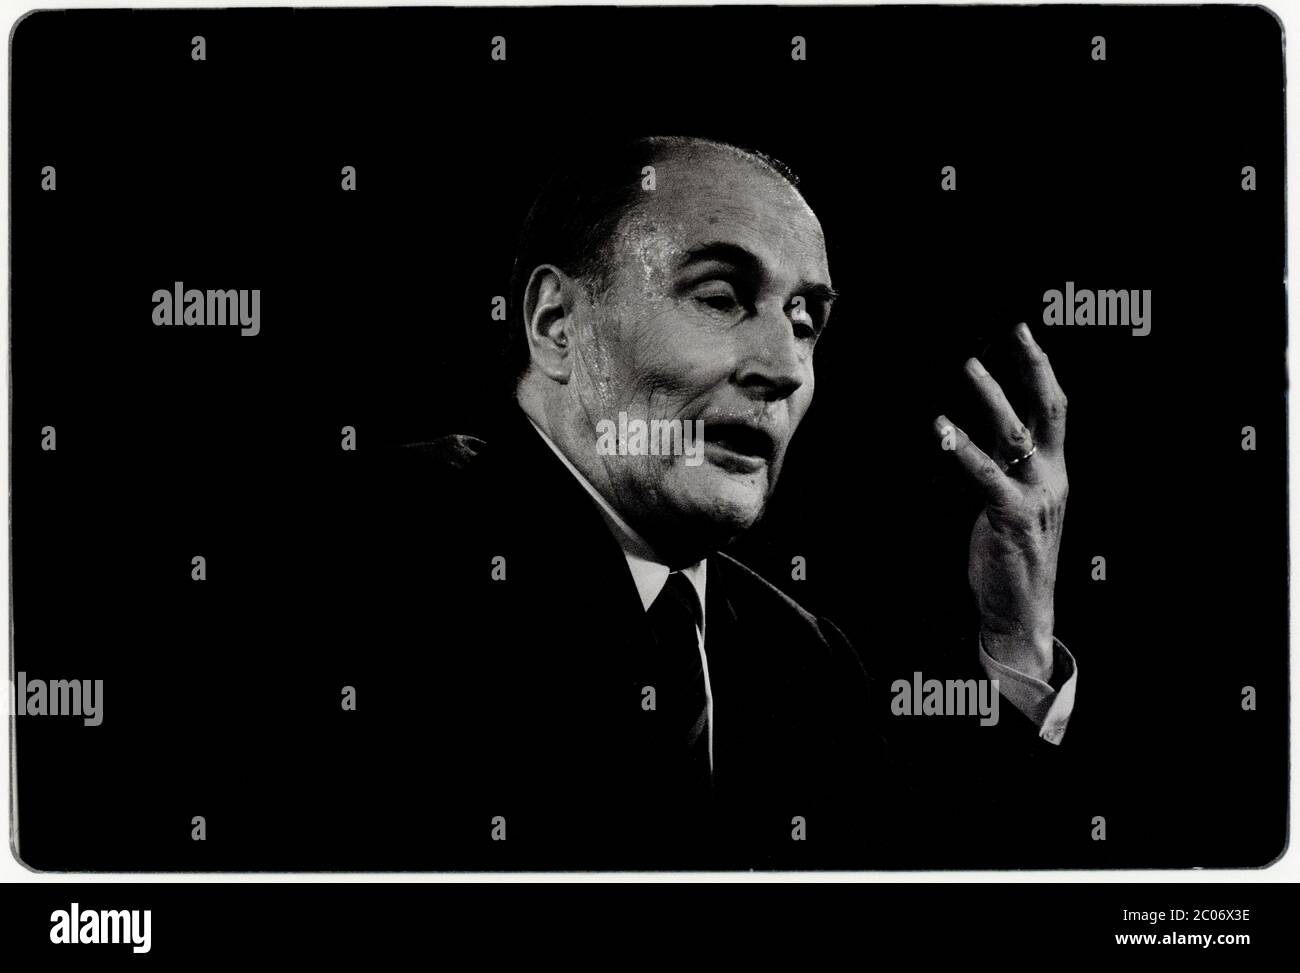 Francois Mitterrand speaking at a Presidential Election Rally in Toulouse, France, 1988 François Maurice Adrien Marie Mitterrand[a] (26 October 1916 – 8 January 1996) was a French statesman who served as President of France from 1981 to 1995, the longest time in office in the history of France. As First Secretary of the Socialist Party, he was the first left-wing politician to assume the presidency under the Fifth Republic. Stock Photo